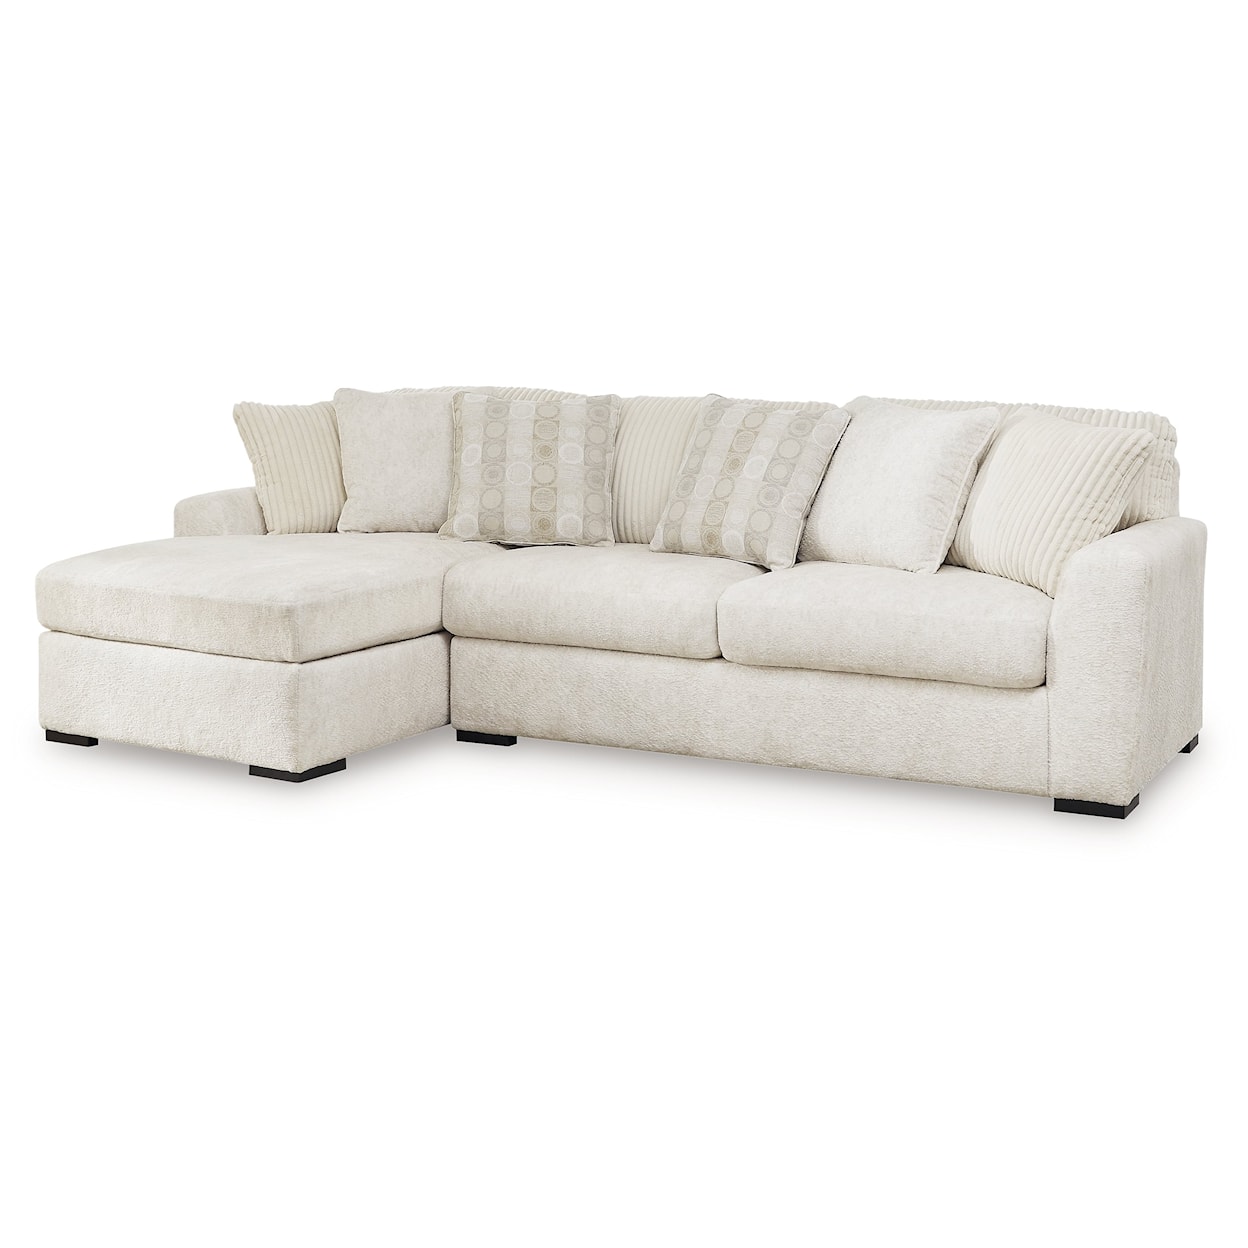 Ashley Furniture Signature Design Chessington 2-Piece Sectional With Chaise